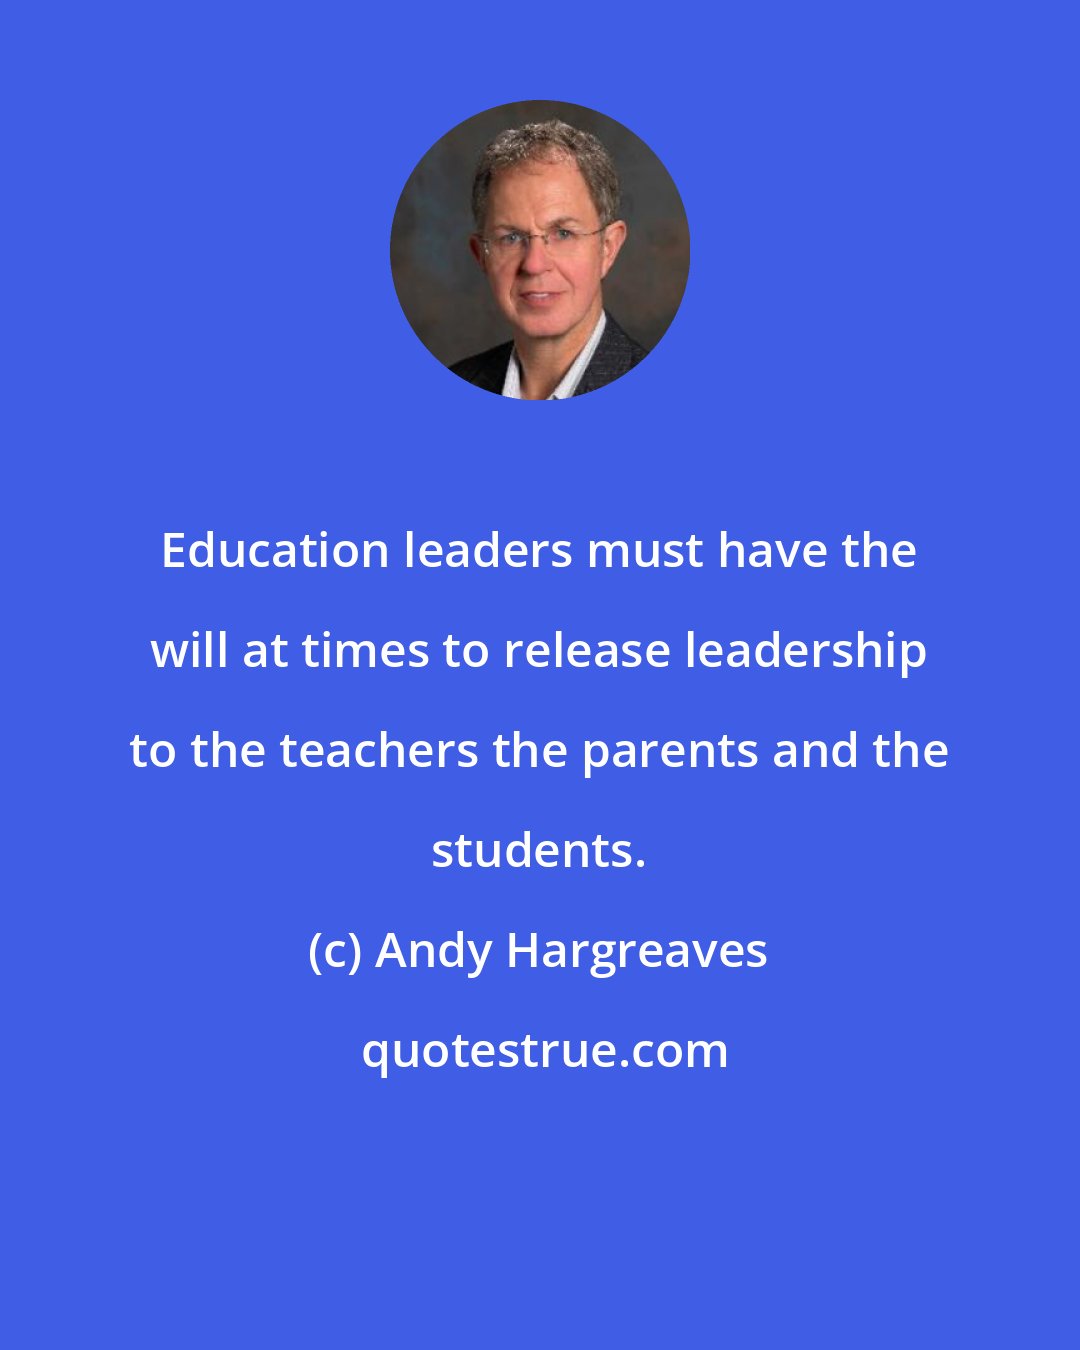 Andy Hargreaves: Education leaders must have the will at times to release leadership to the teachers the parents and the students.